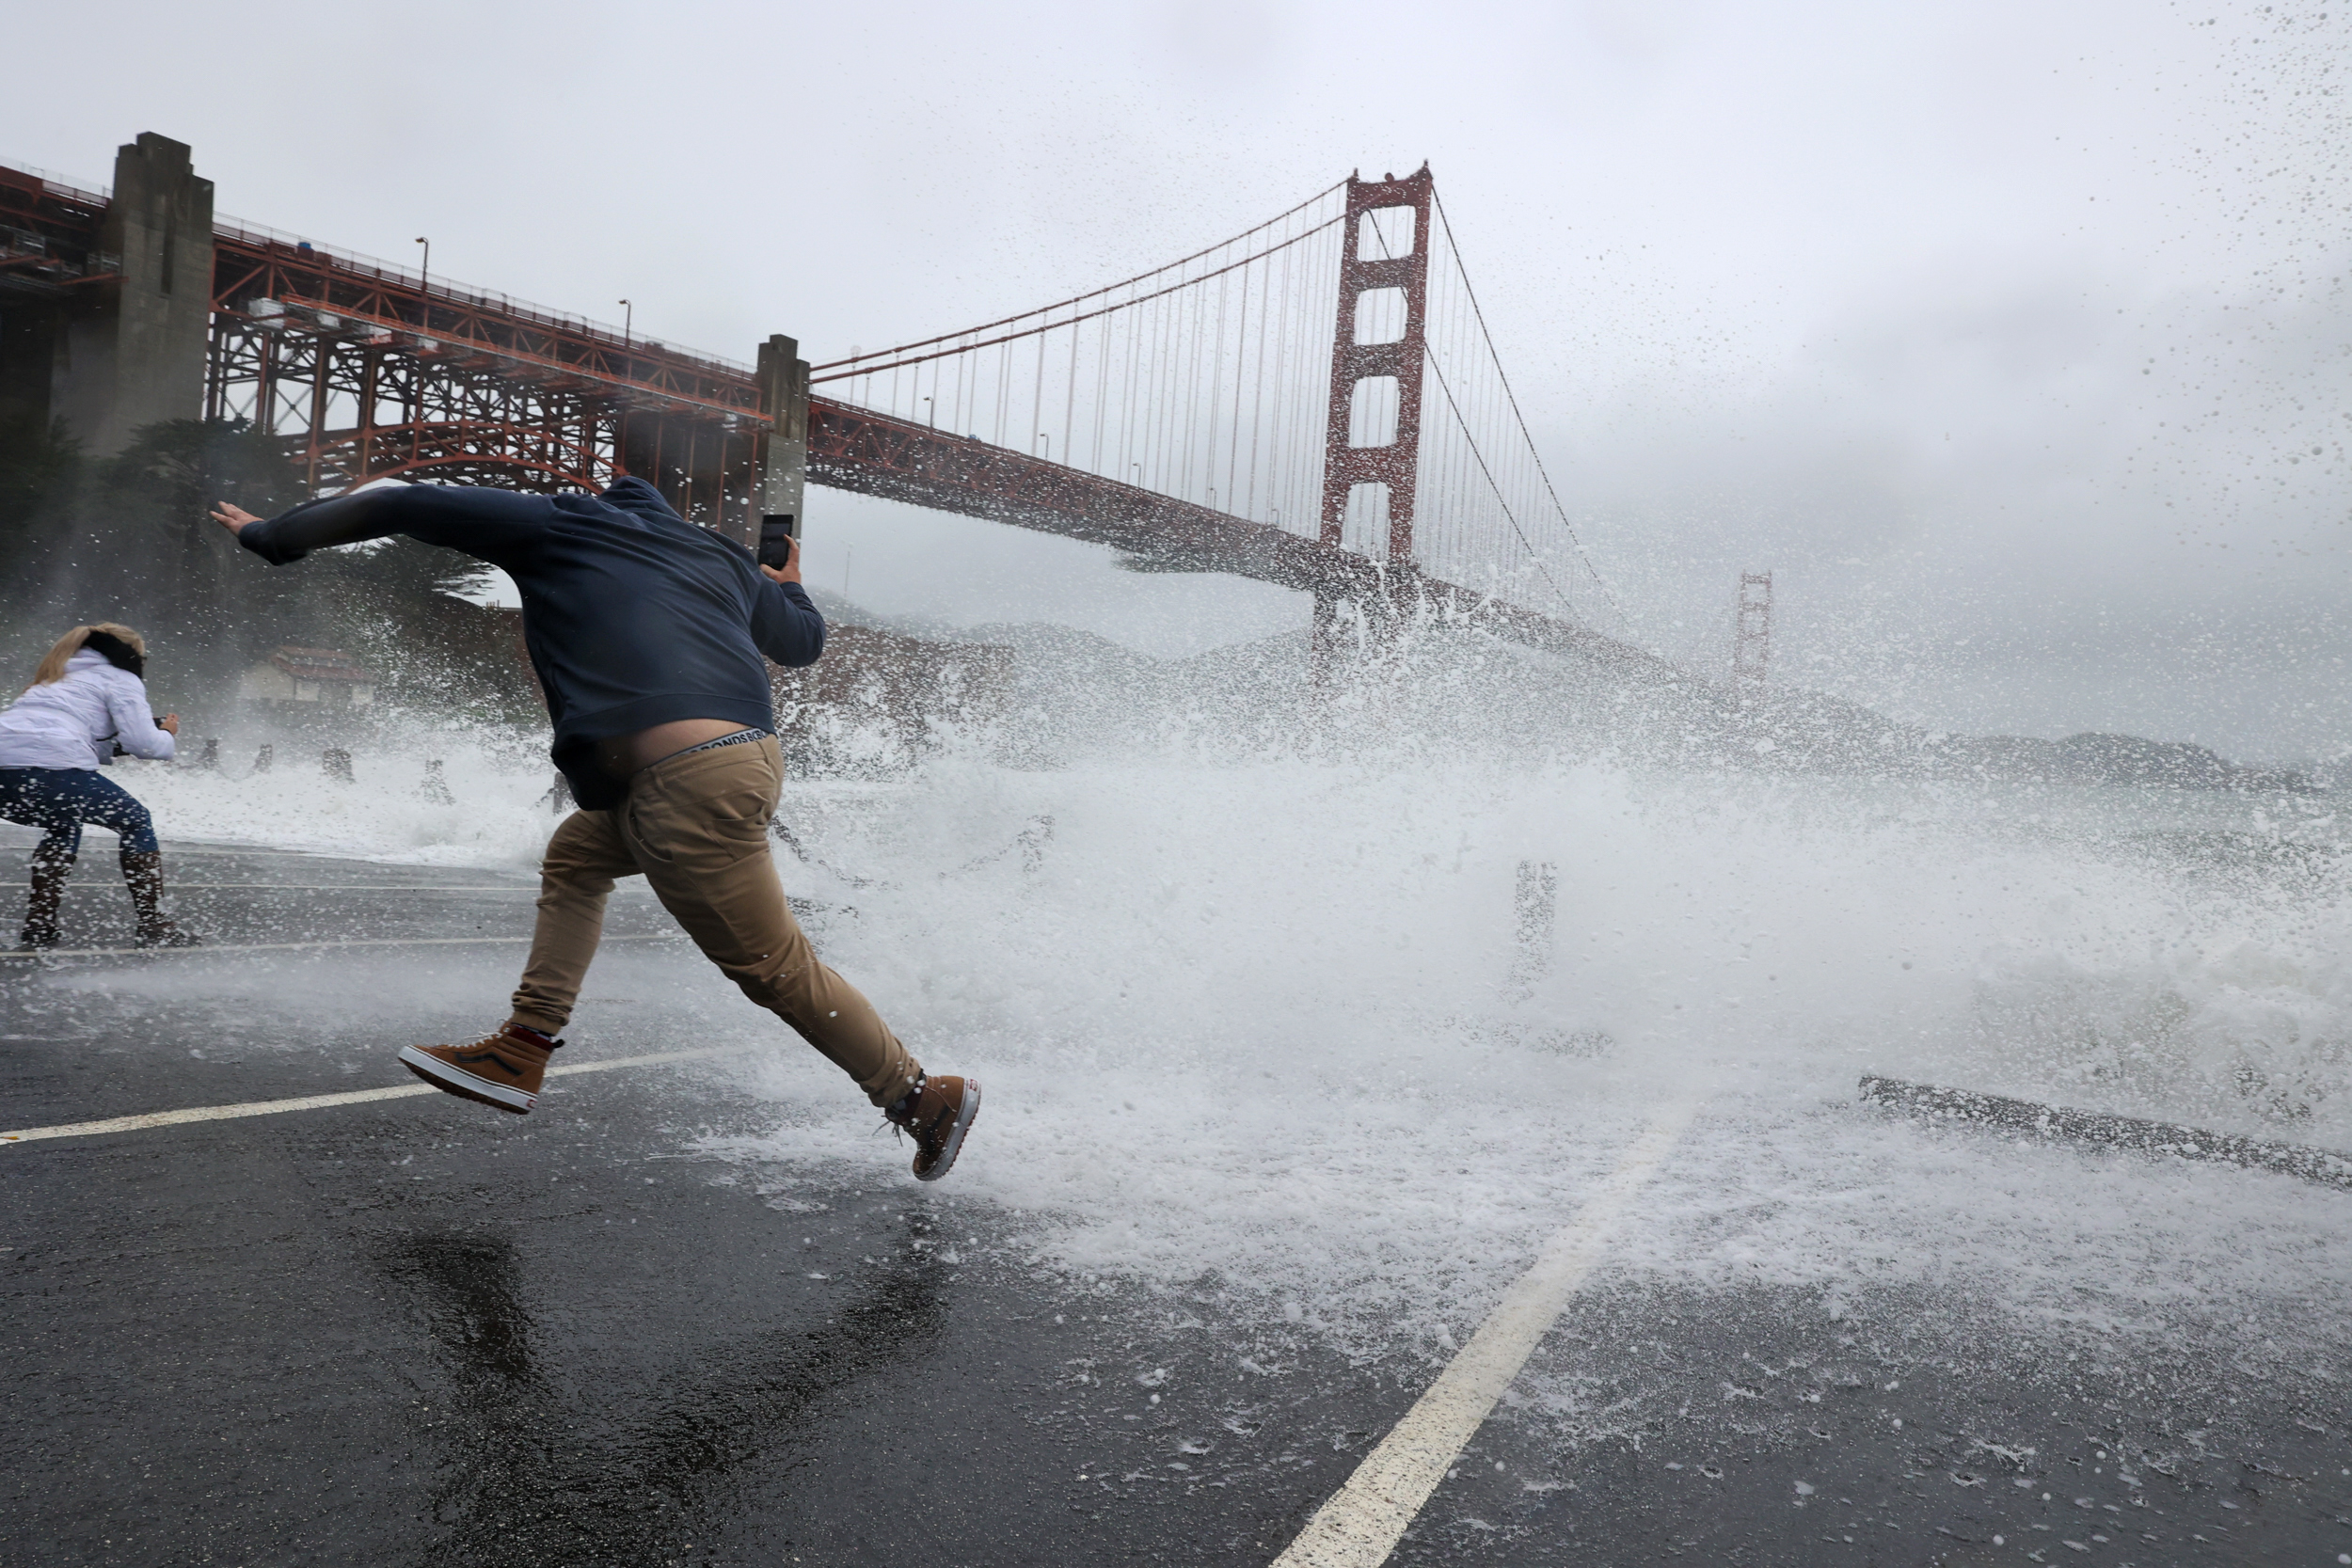 In San Franciso, beneath the Golden Gate Bridge, a man jumps over a wave that hits the pavement.